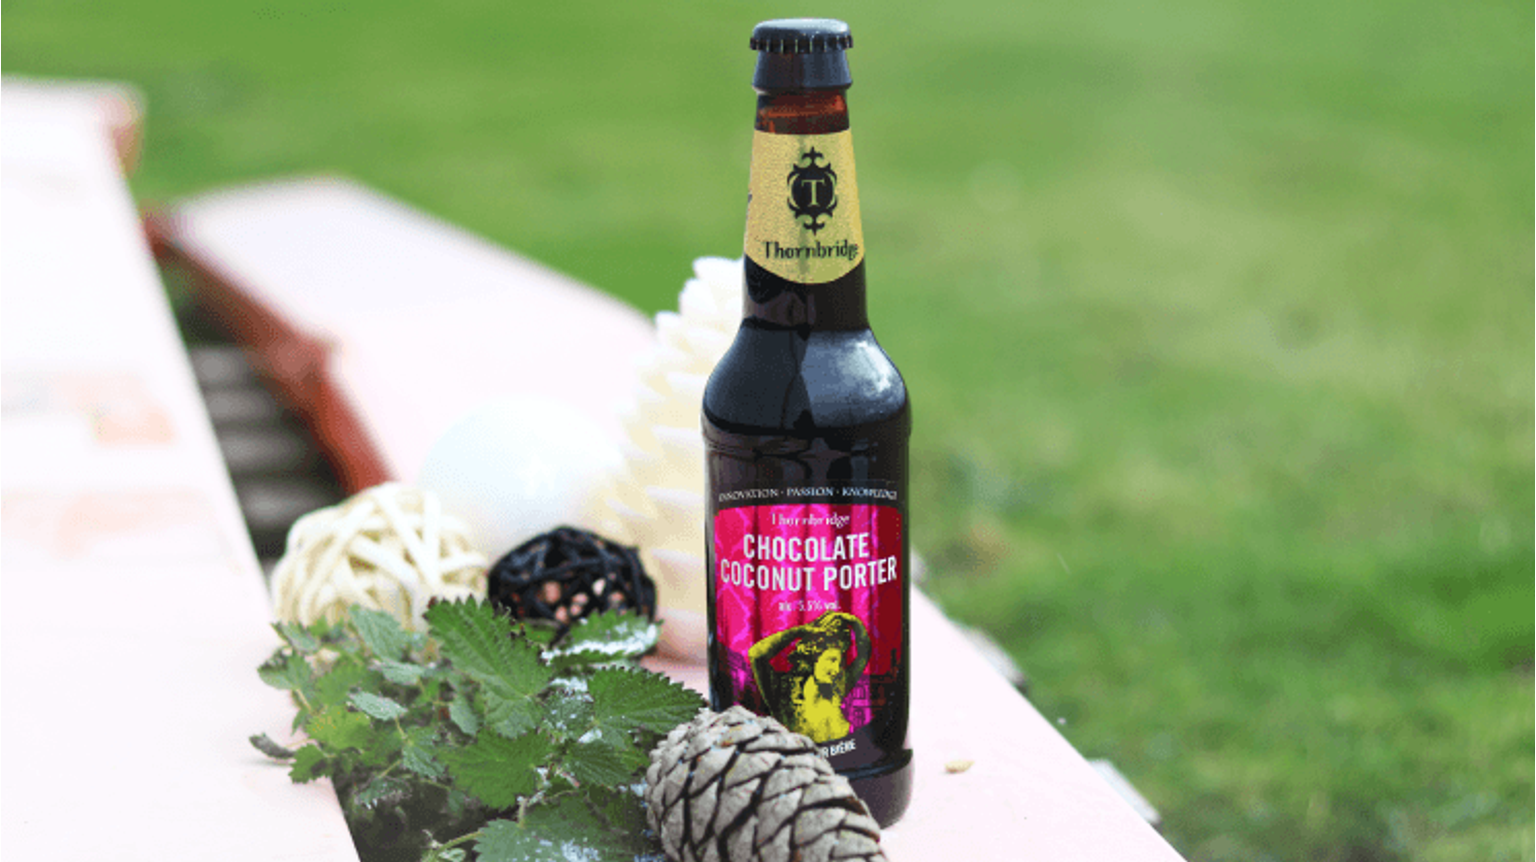 thumbnail for blog article named: Chocolate Coconut Porter - Thornbridge Brewery